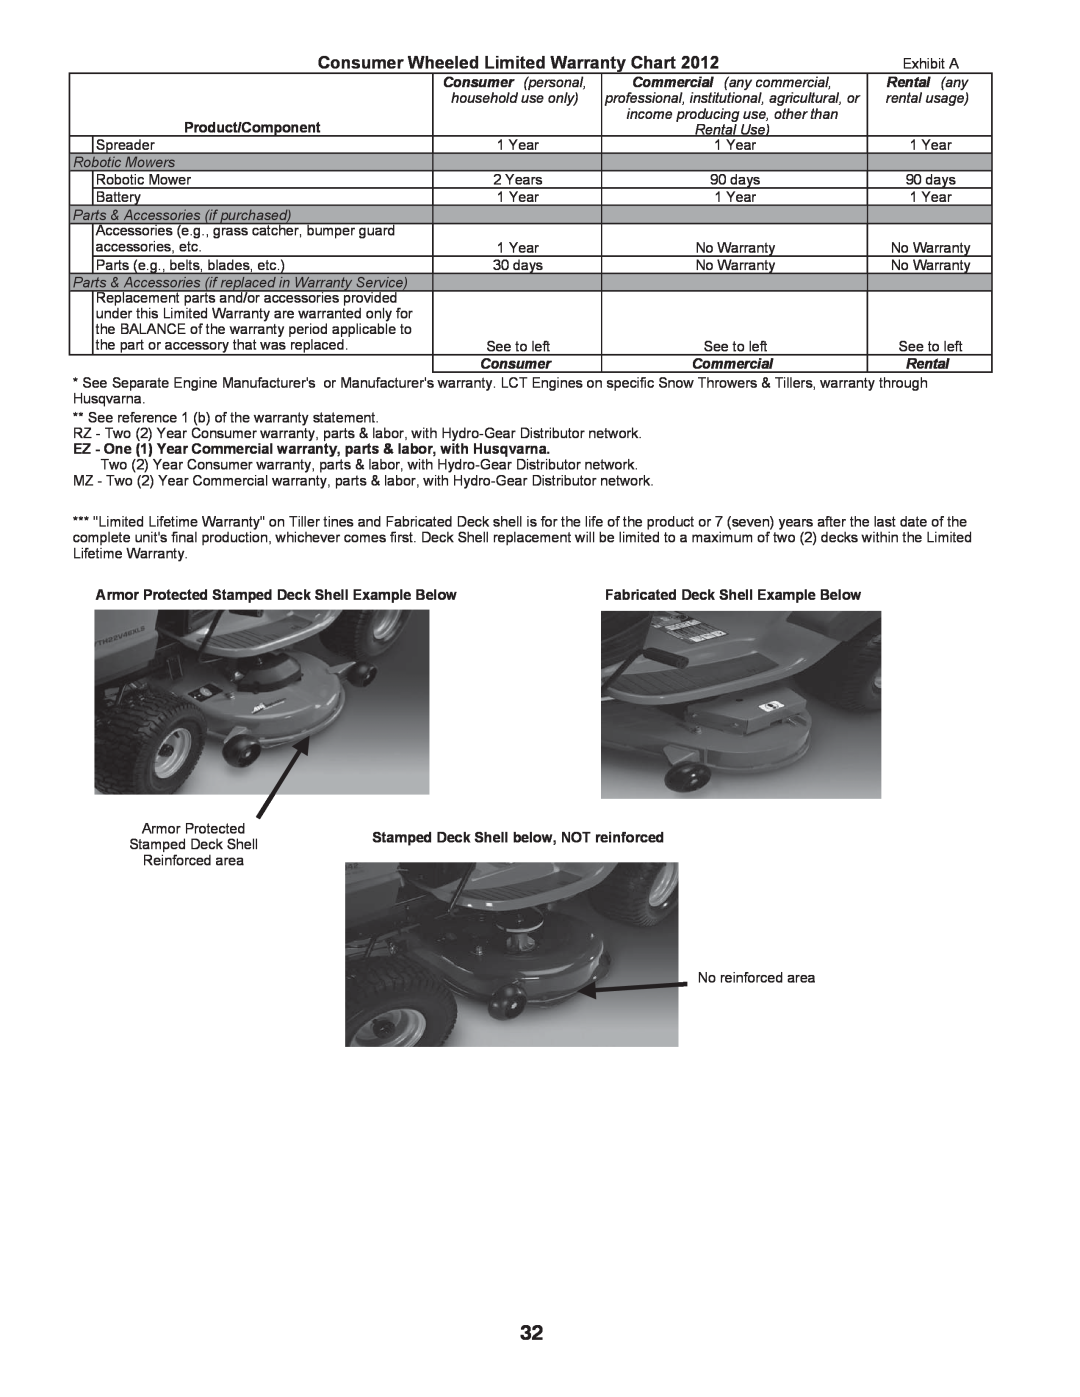 Husqvarna YTH18K46 owner manual Consumer Wheeled Limited Warranty Chart, Rental any, Product/Component 